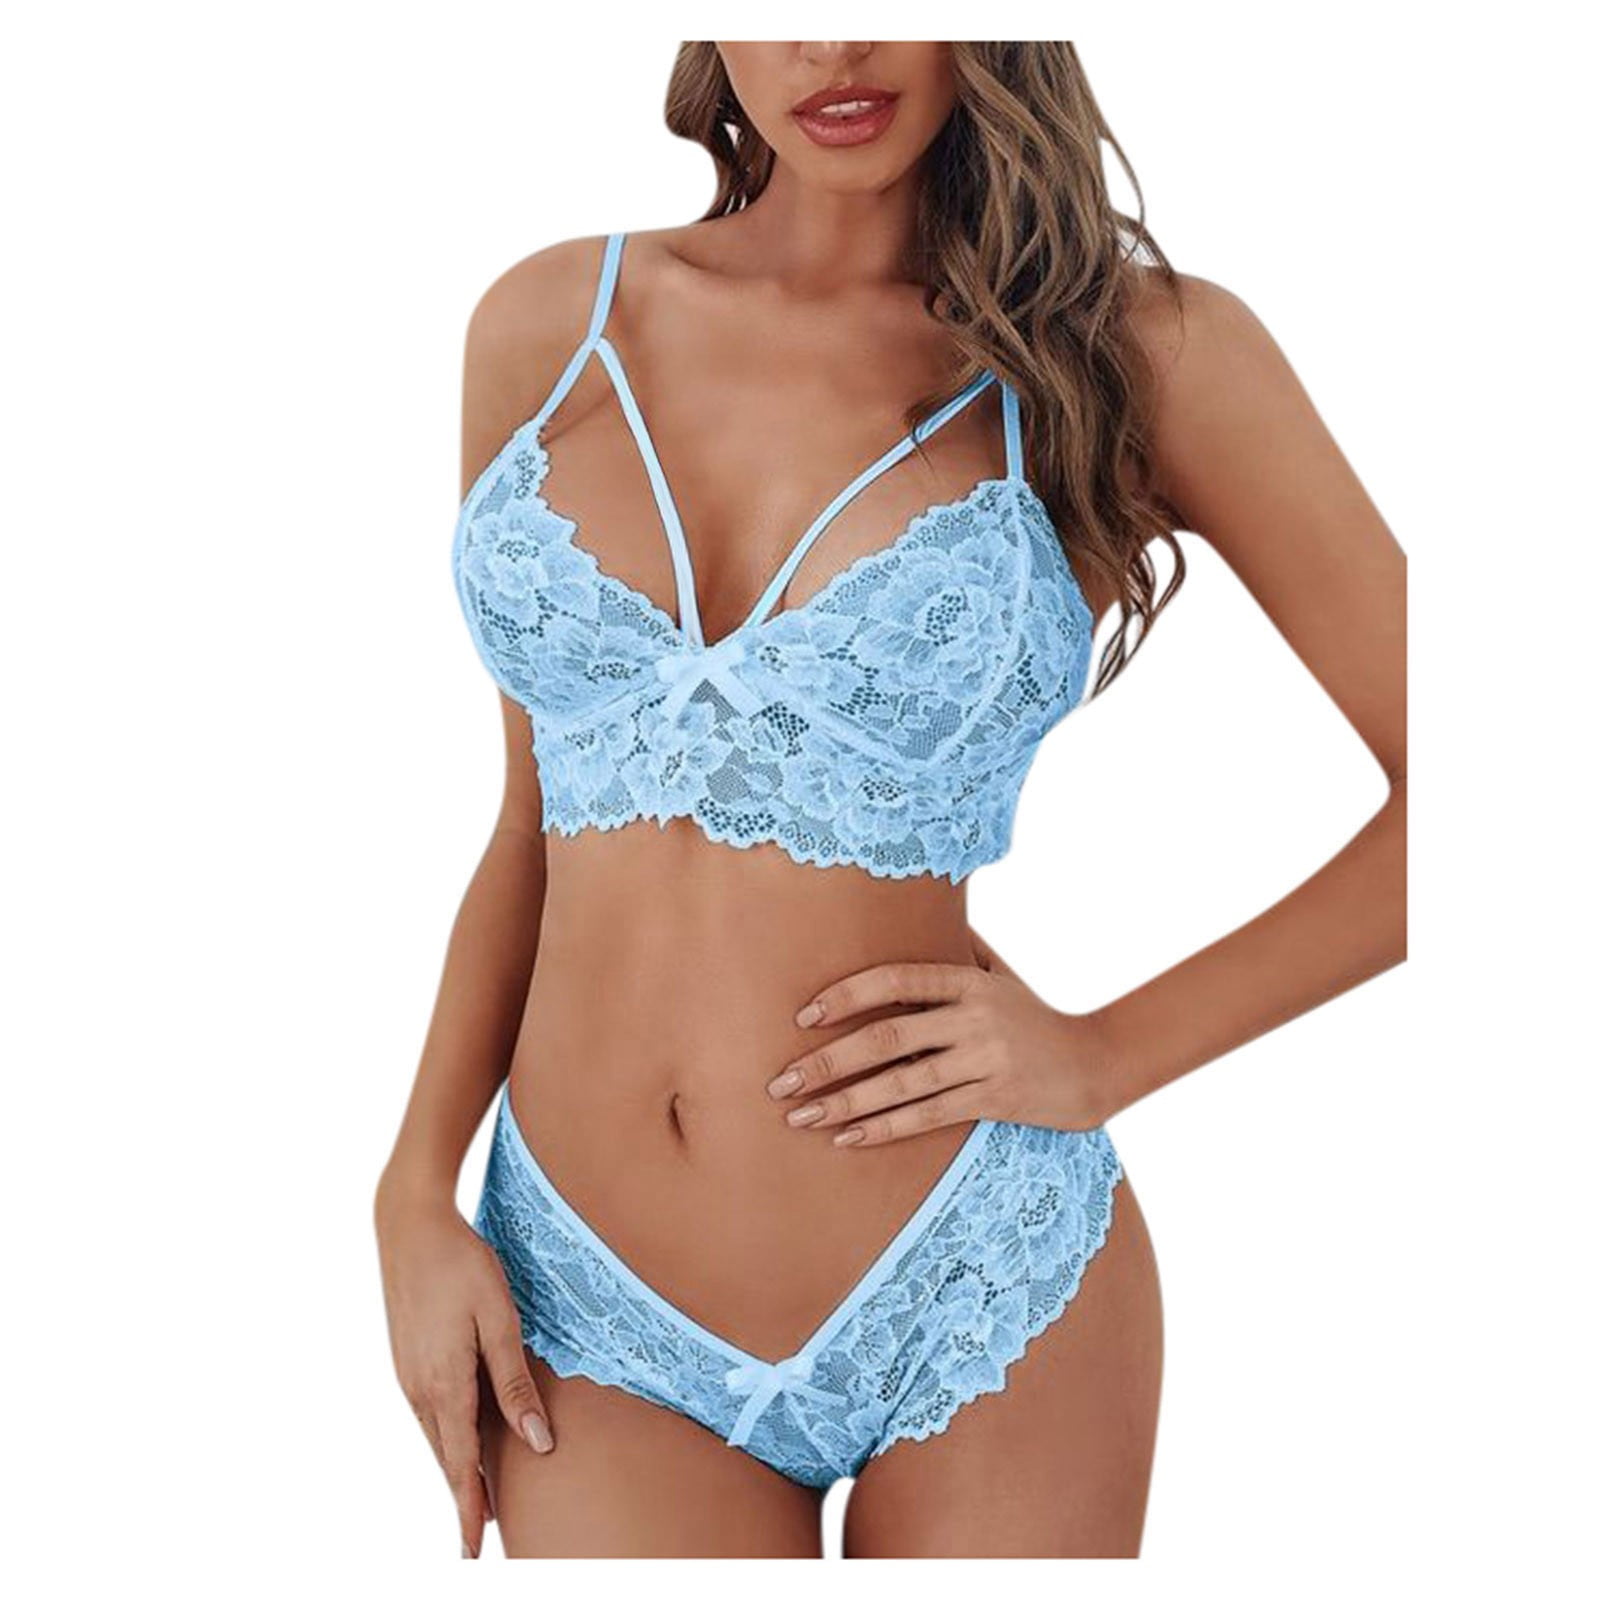 Matching Lace Bra and Panty Set, Get 30% off, Snazzyway